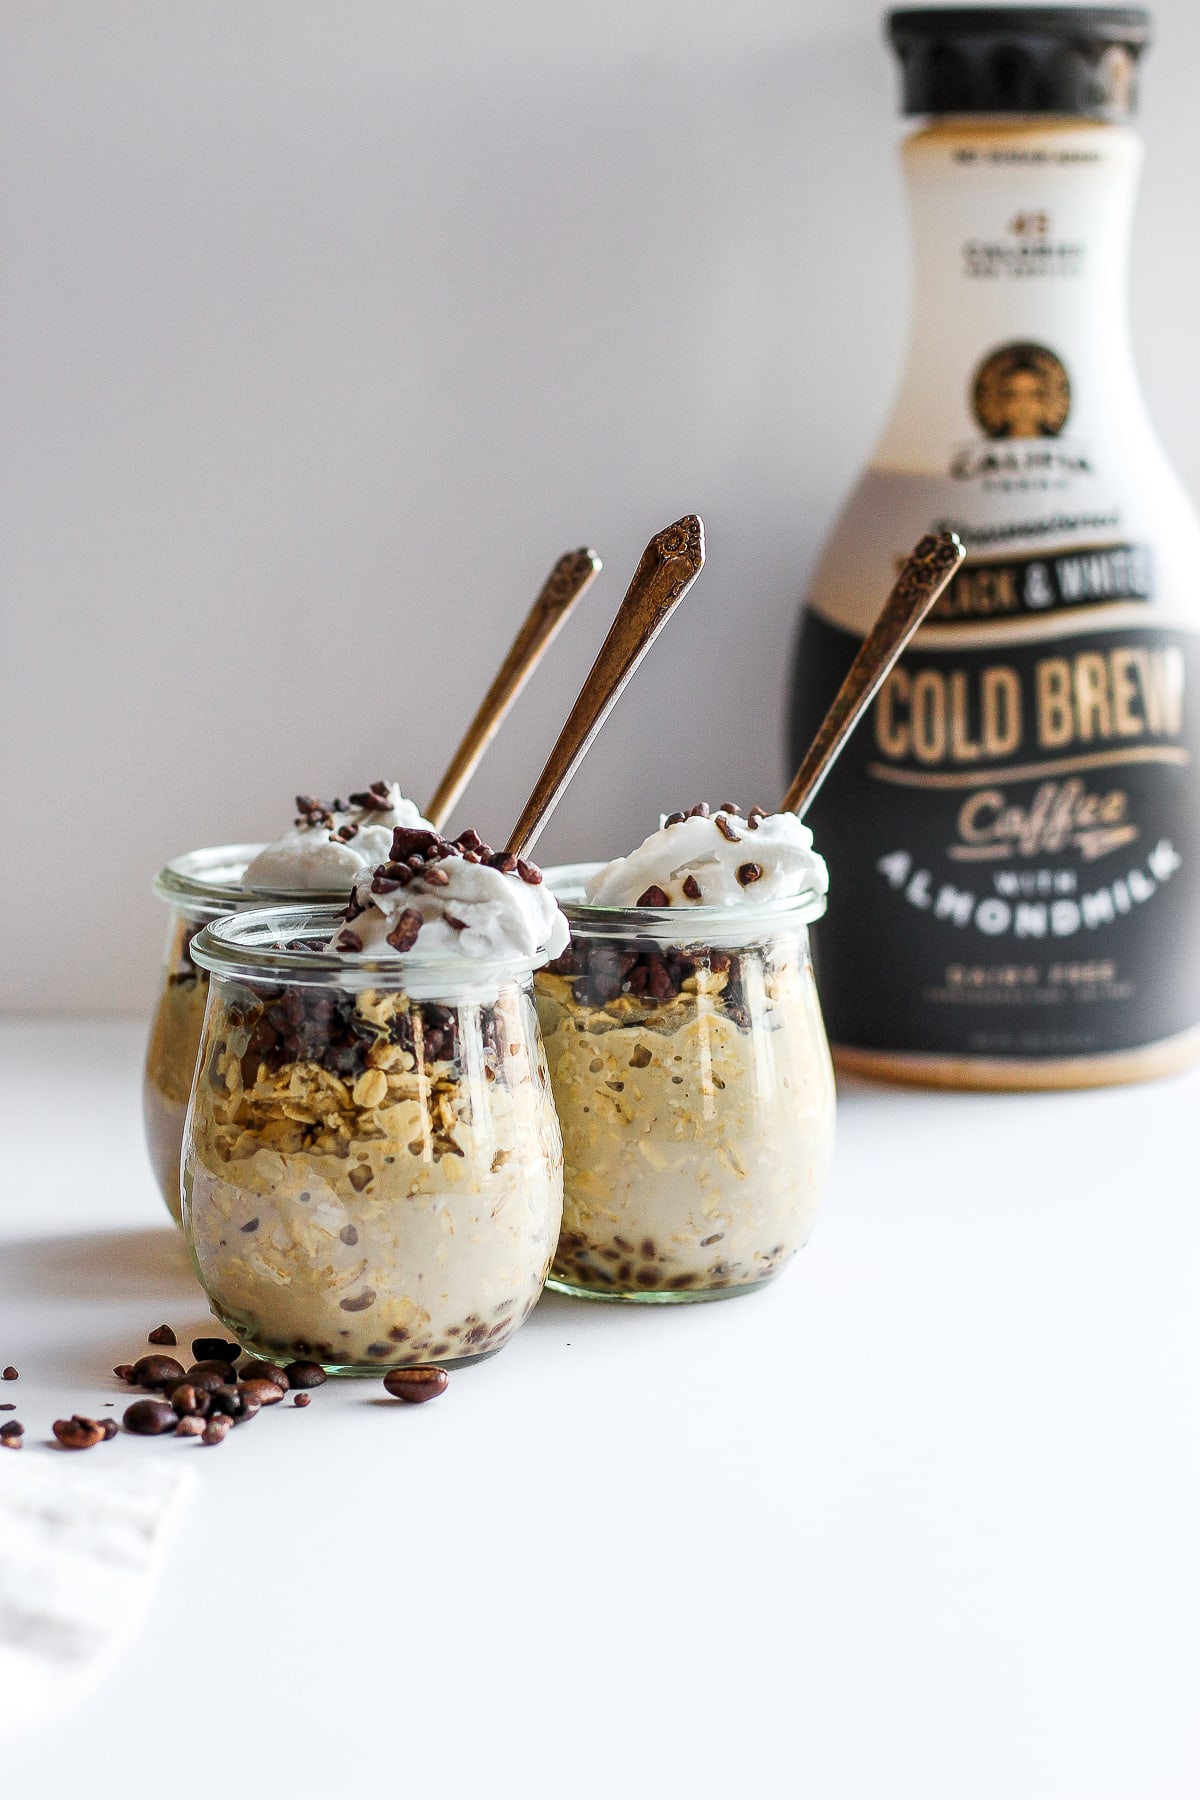 Three jars of cold brew overnight oats with a container of Califia Farms cold brew coffee in the background.